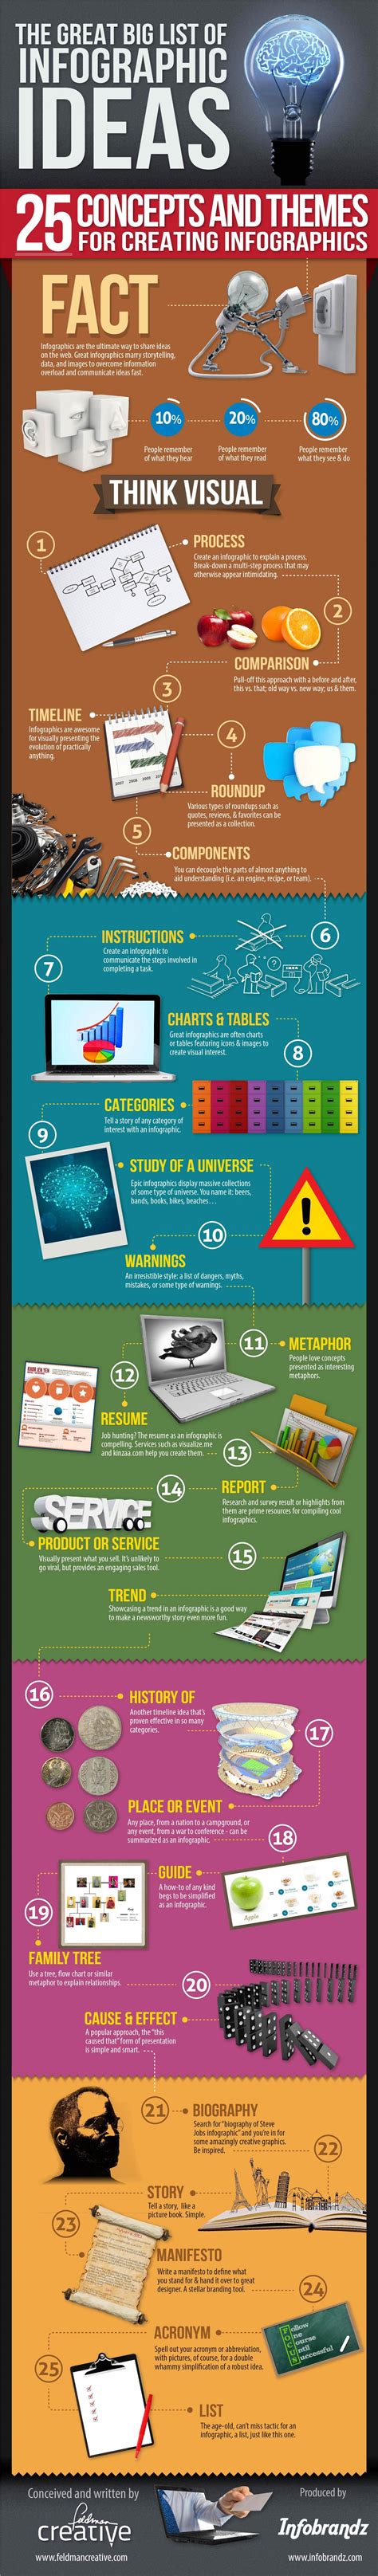 the great big list of infographic ideas [infographic] eu vietnam business network evbn